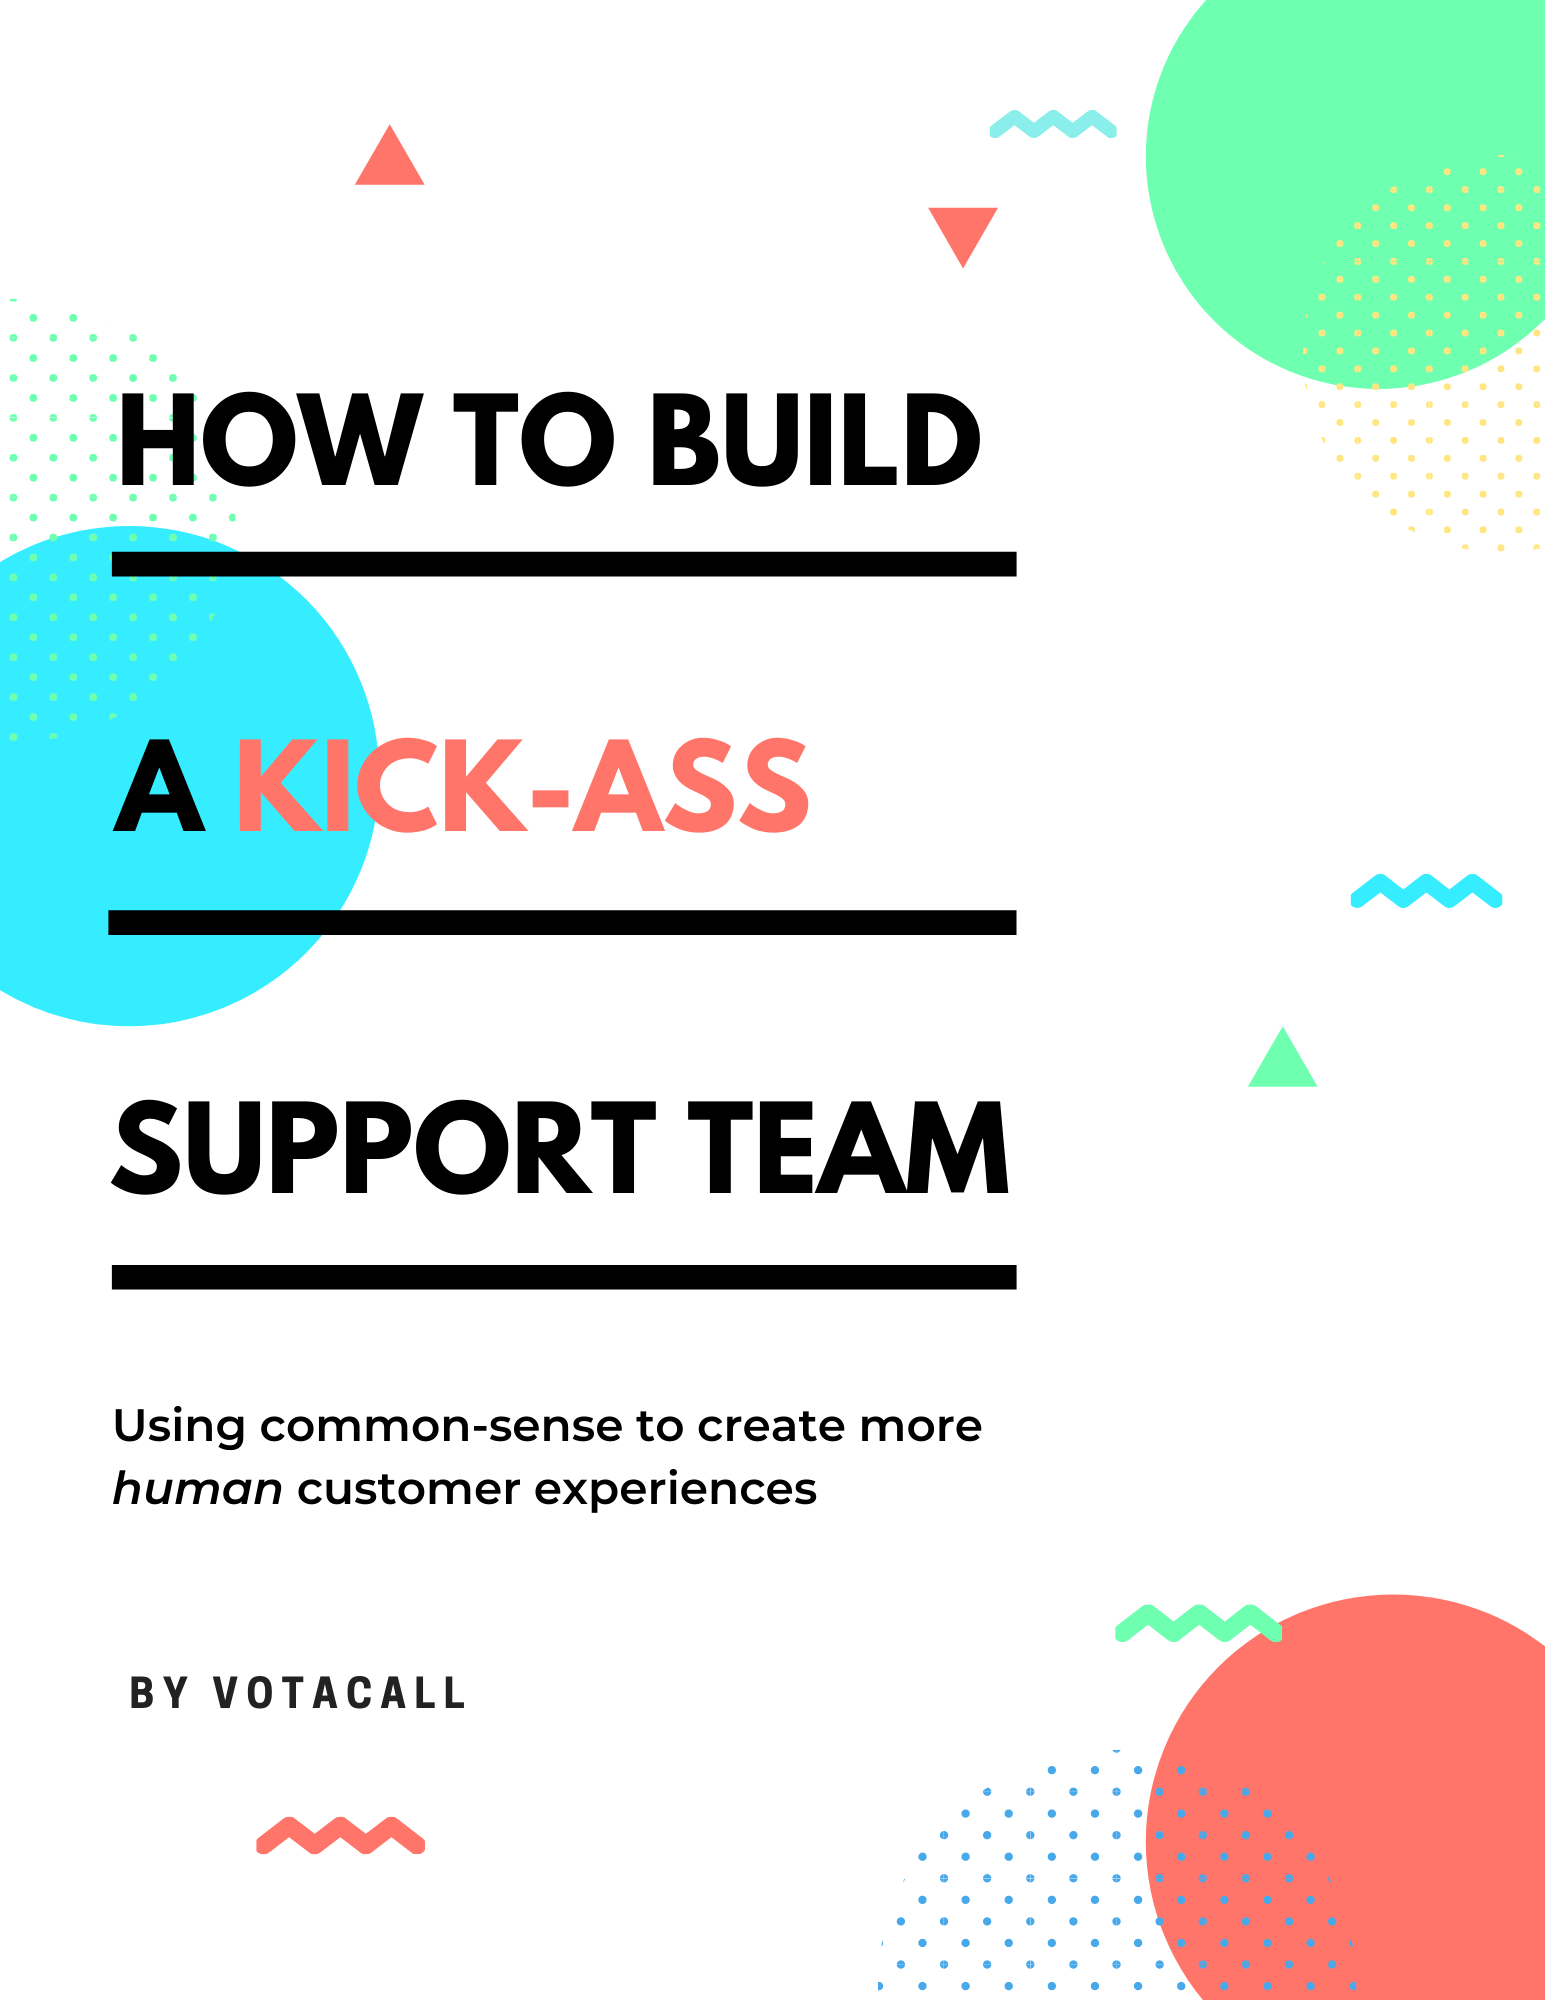 How to Build a Kick-Ass Support Team